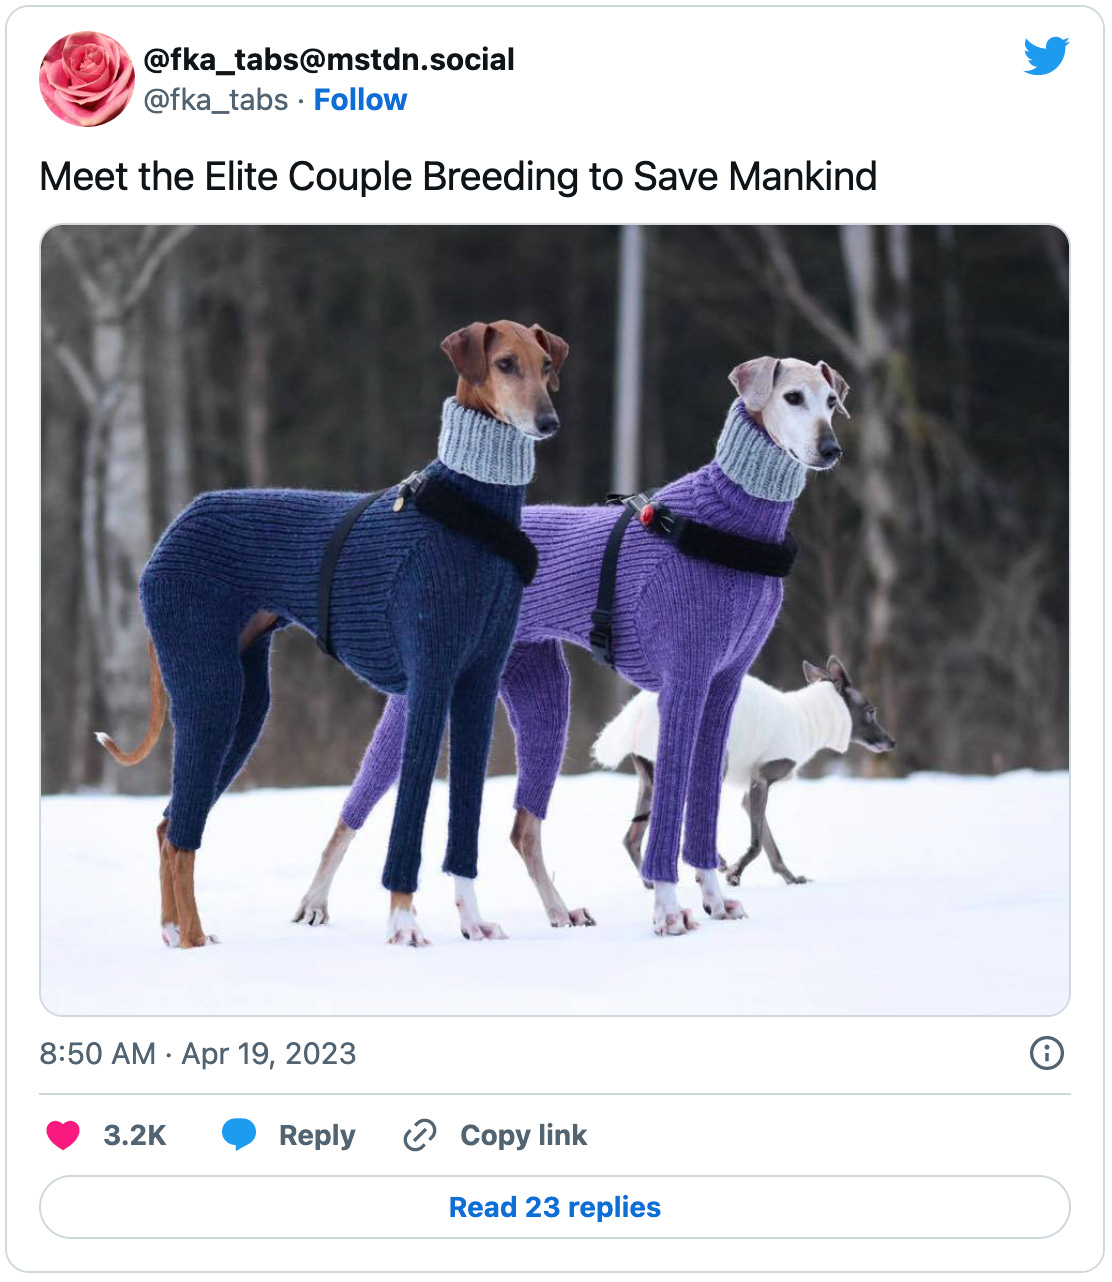 I really try not to put my own tweets in here but I couldn’t help it with this one. It says “Meet the Elite Couple Breeding to Save Mankind” over that viral picture of the two greyhounds wearing long sleeve turtleneck sweaters. I feel a little bad about implying these blameless dogs are Reddit eugenicists, so let me say right here that is not true. 